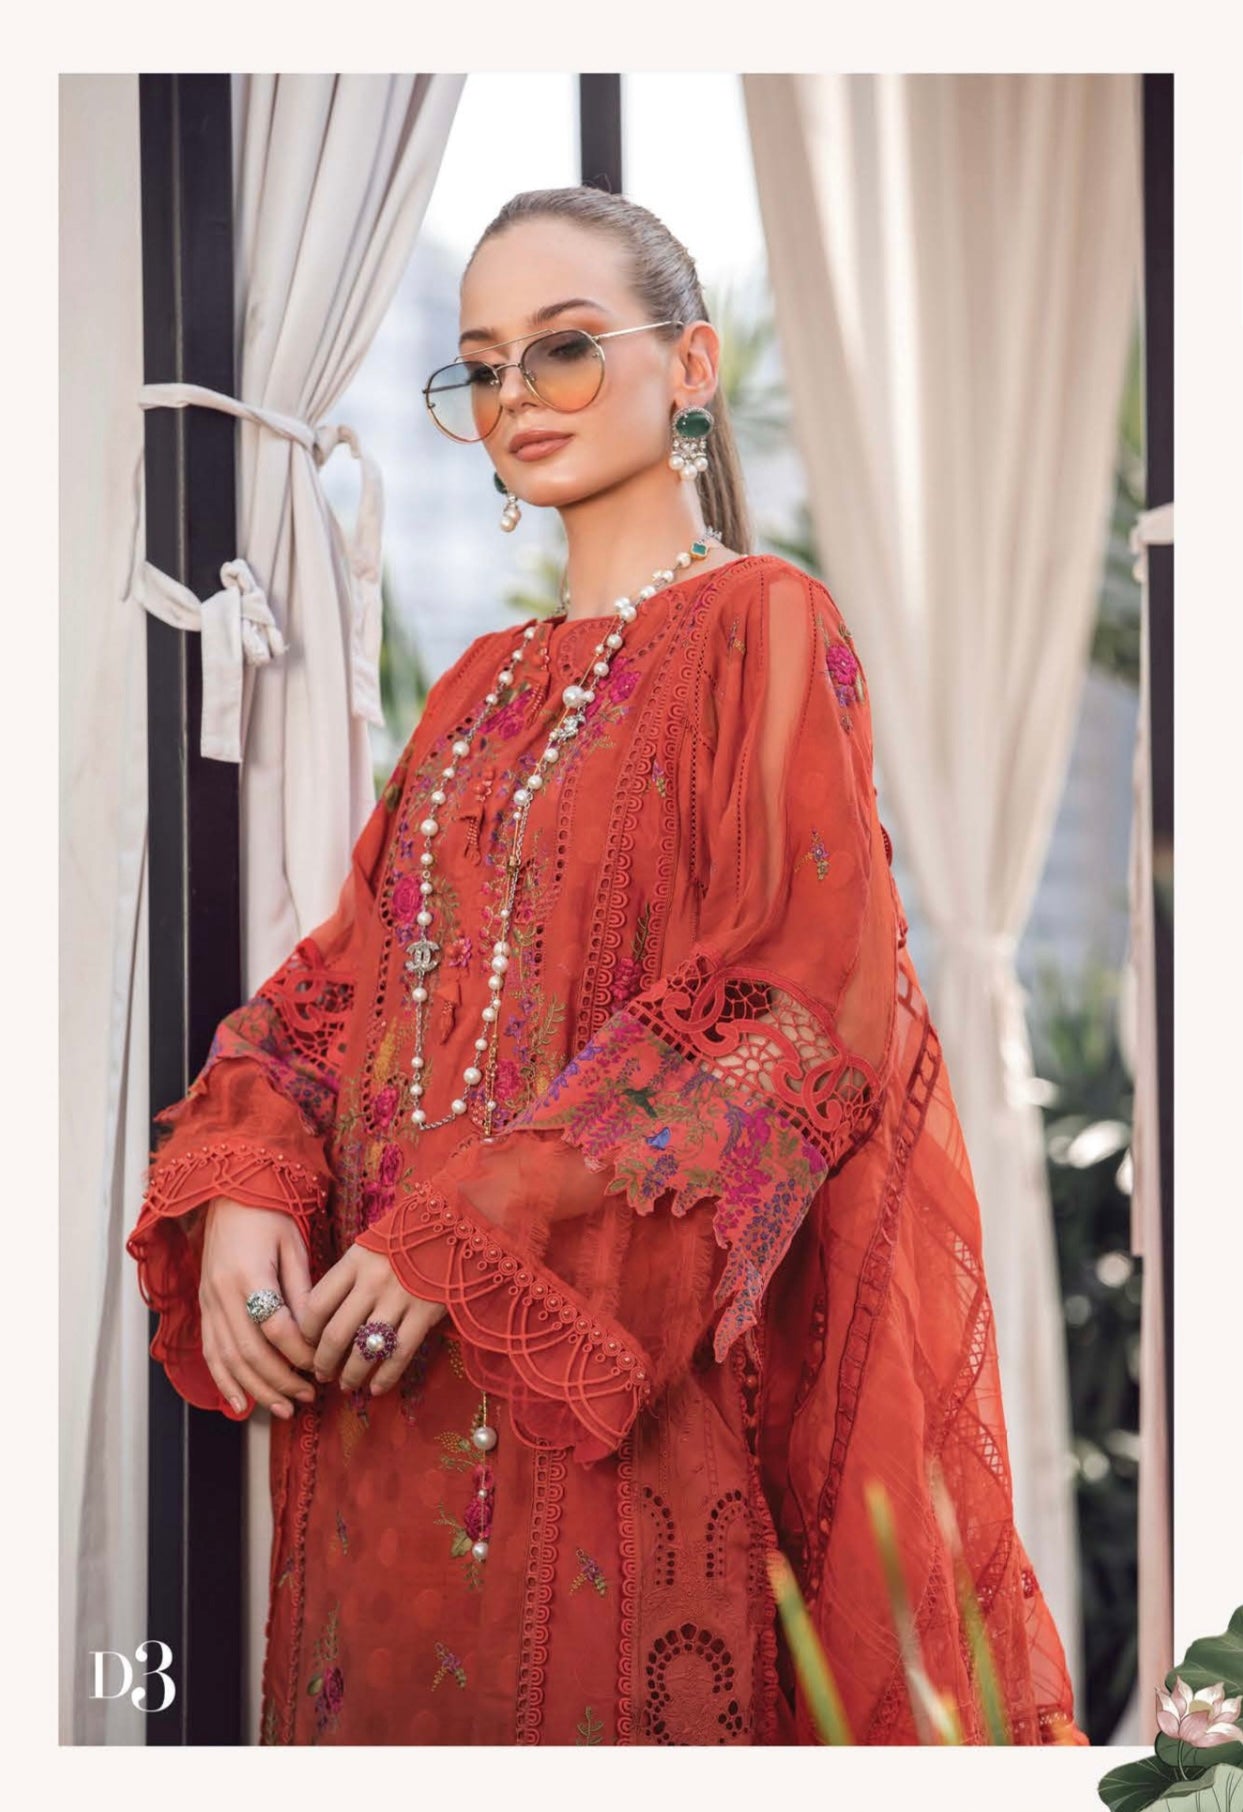 SIMRANS Mb inspired 3 piece luxury embroidered suit in orange MB3736-ORANGE